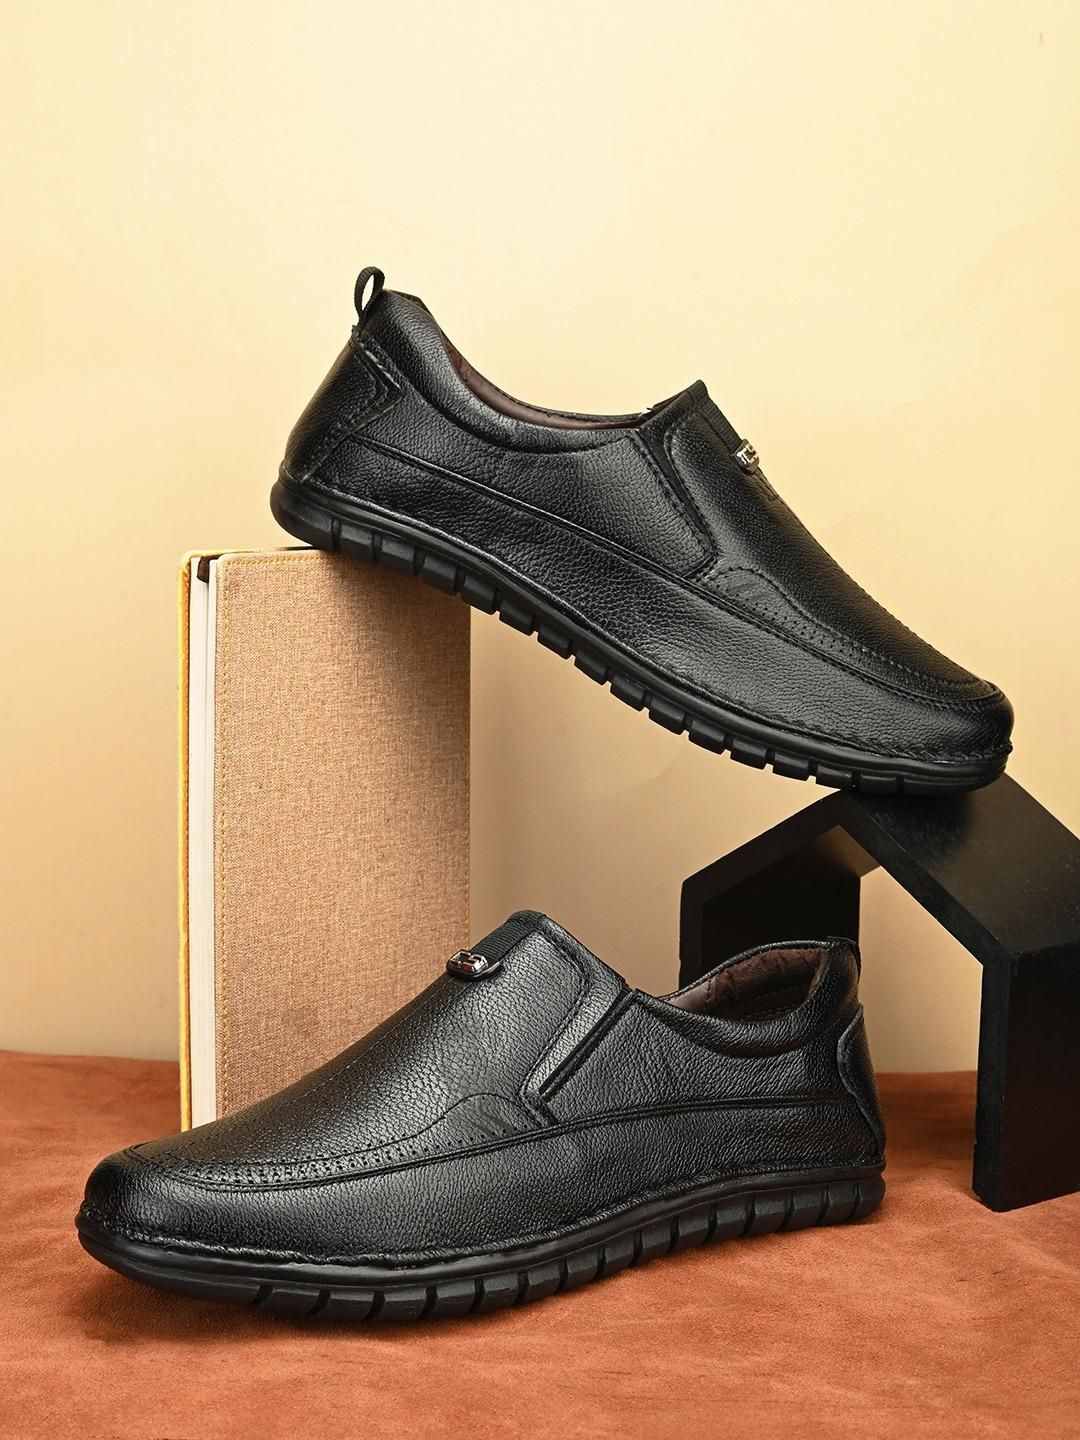 Men's Leather Slip-on Moccasin Casual Shoes